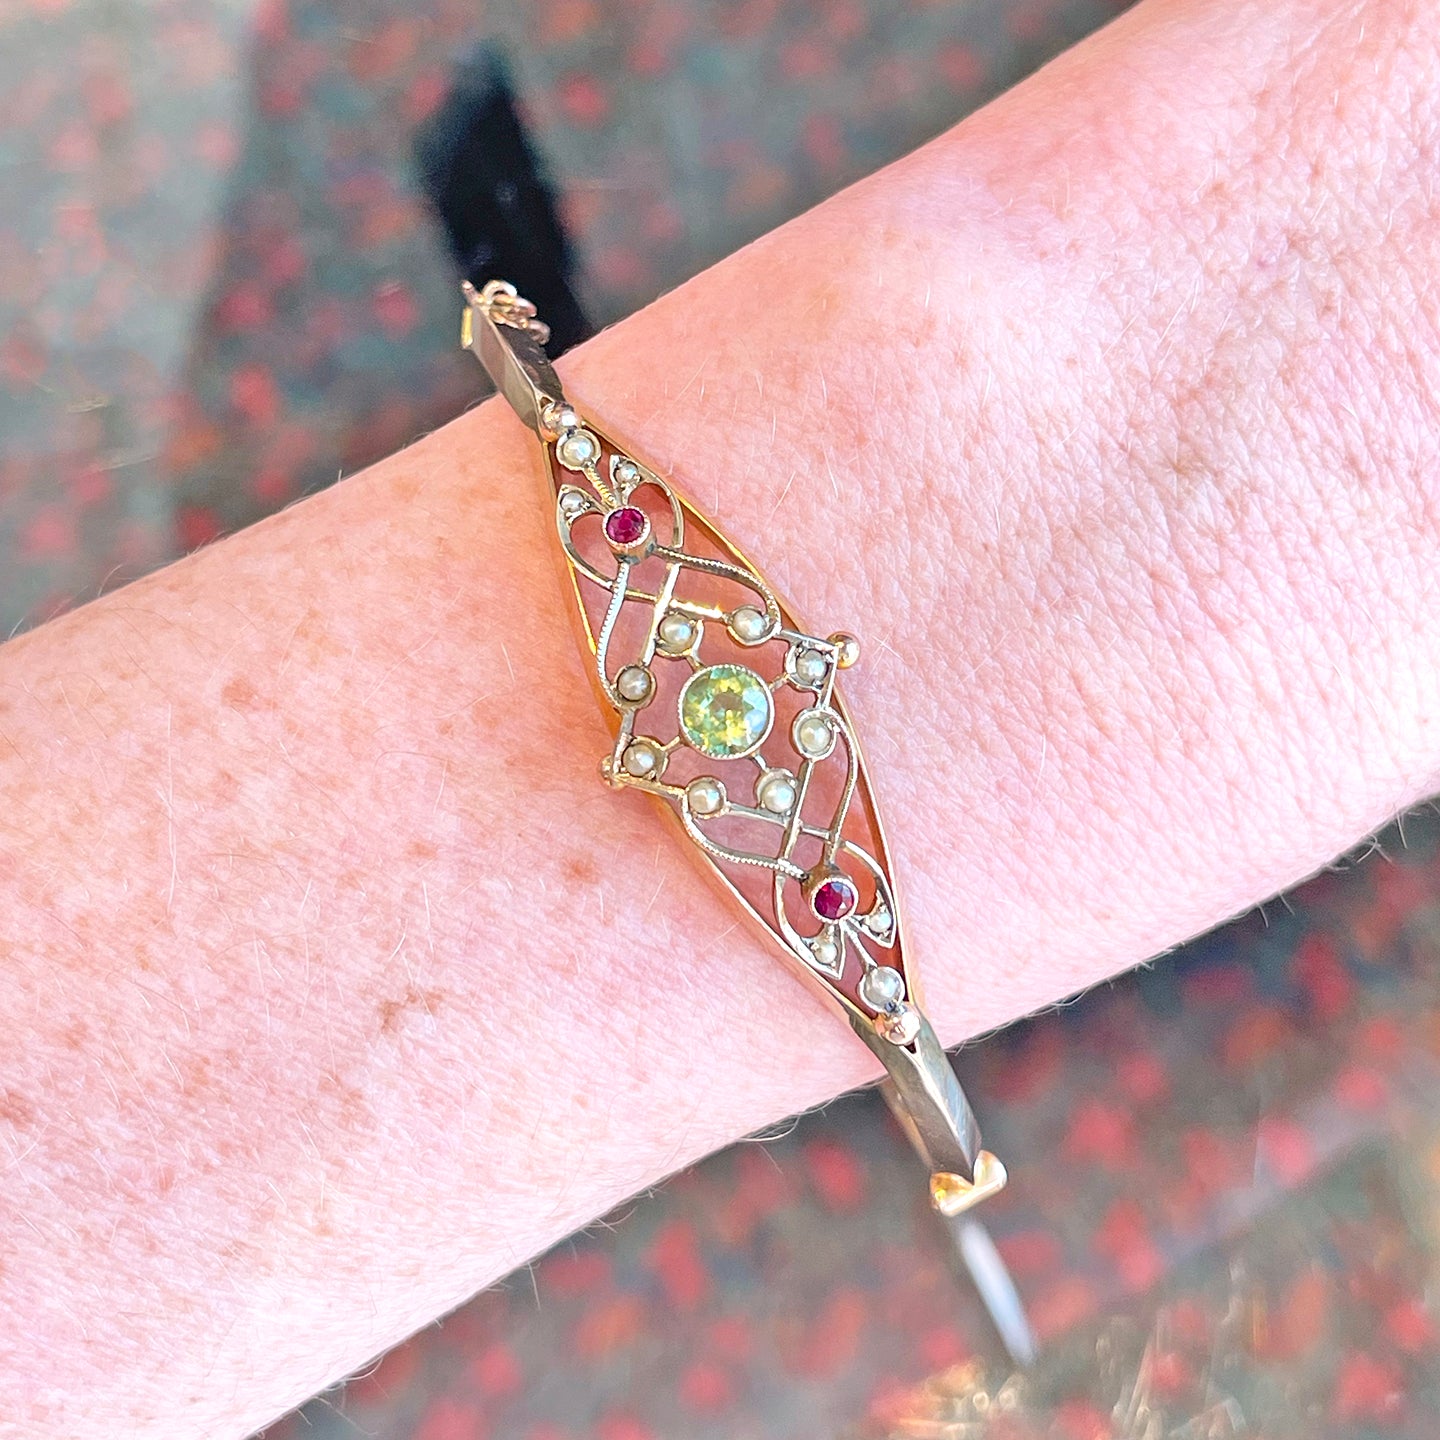 Antique Edwardian Suffragette Bangle Bracelet with Ruby, Pearls and Peridot 9k Gold